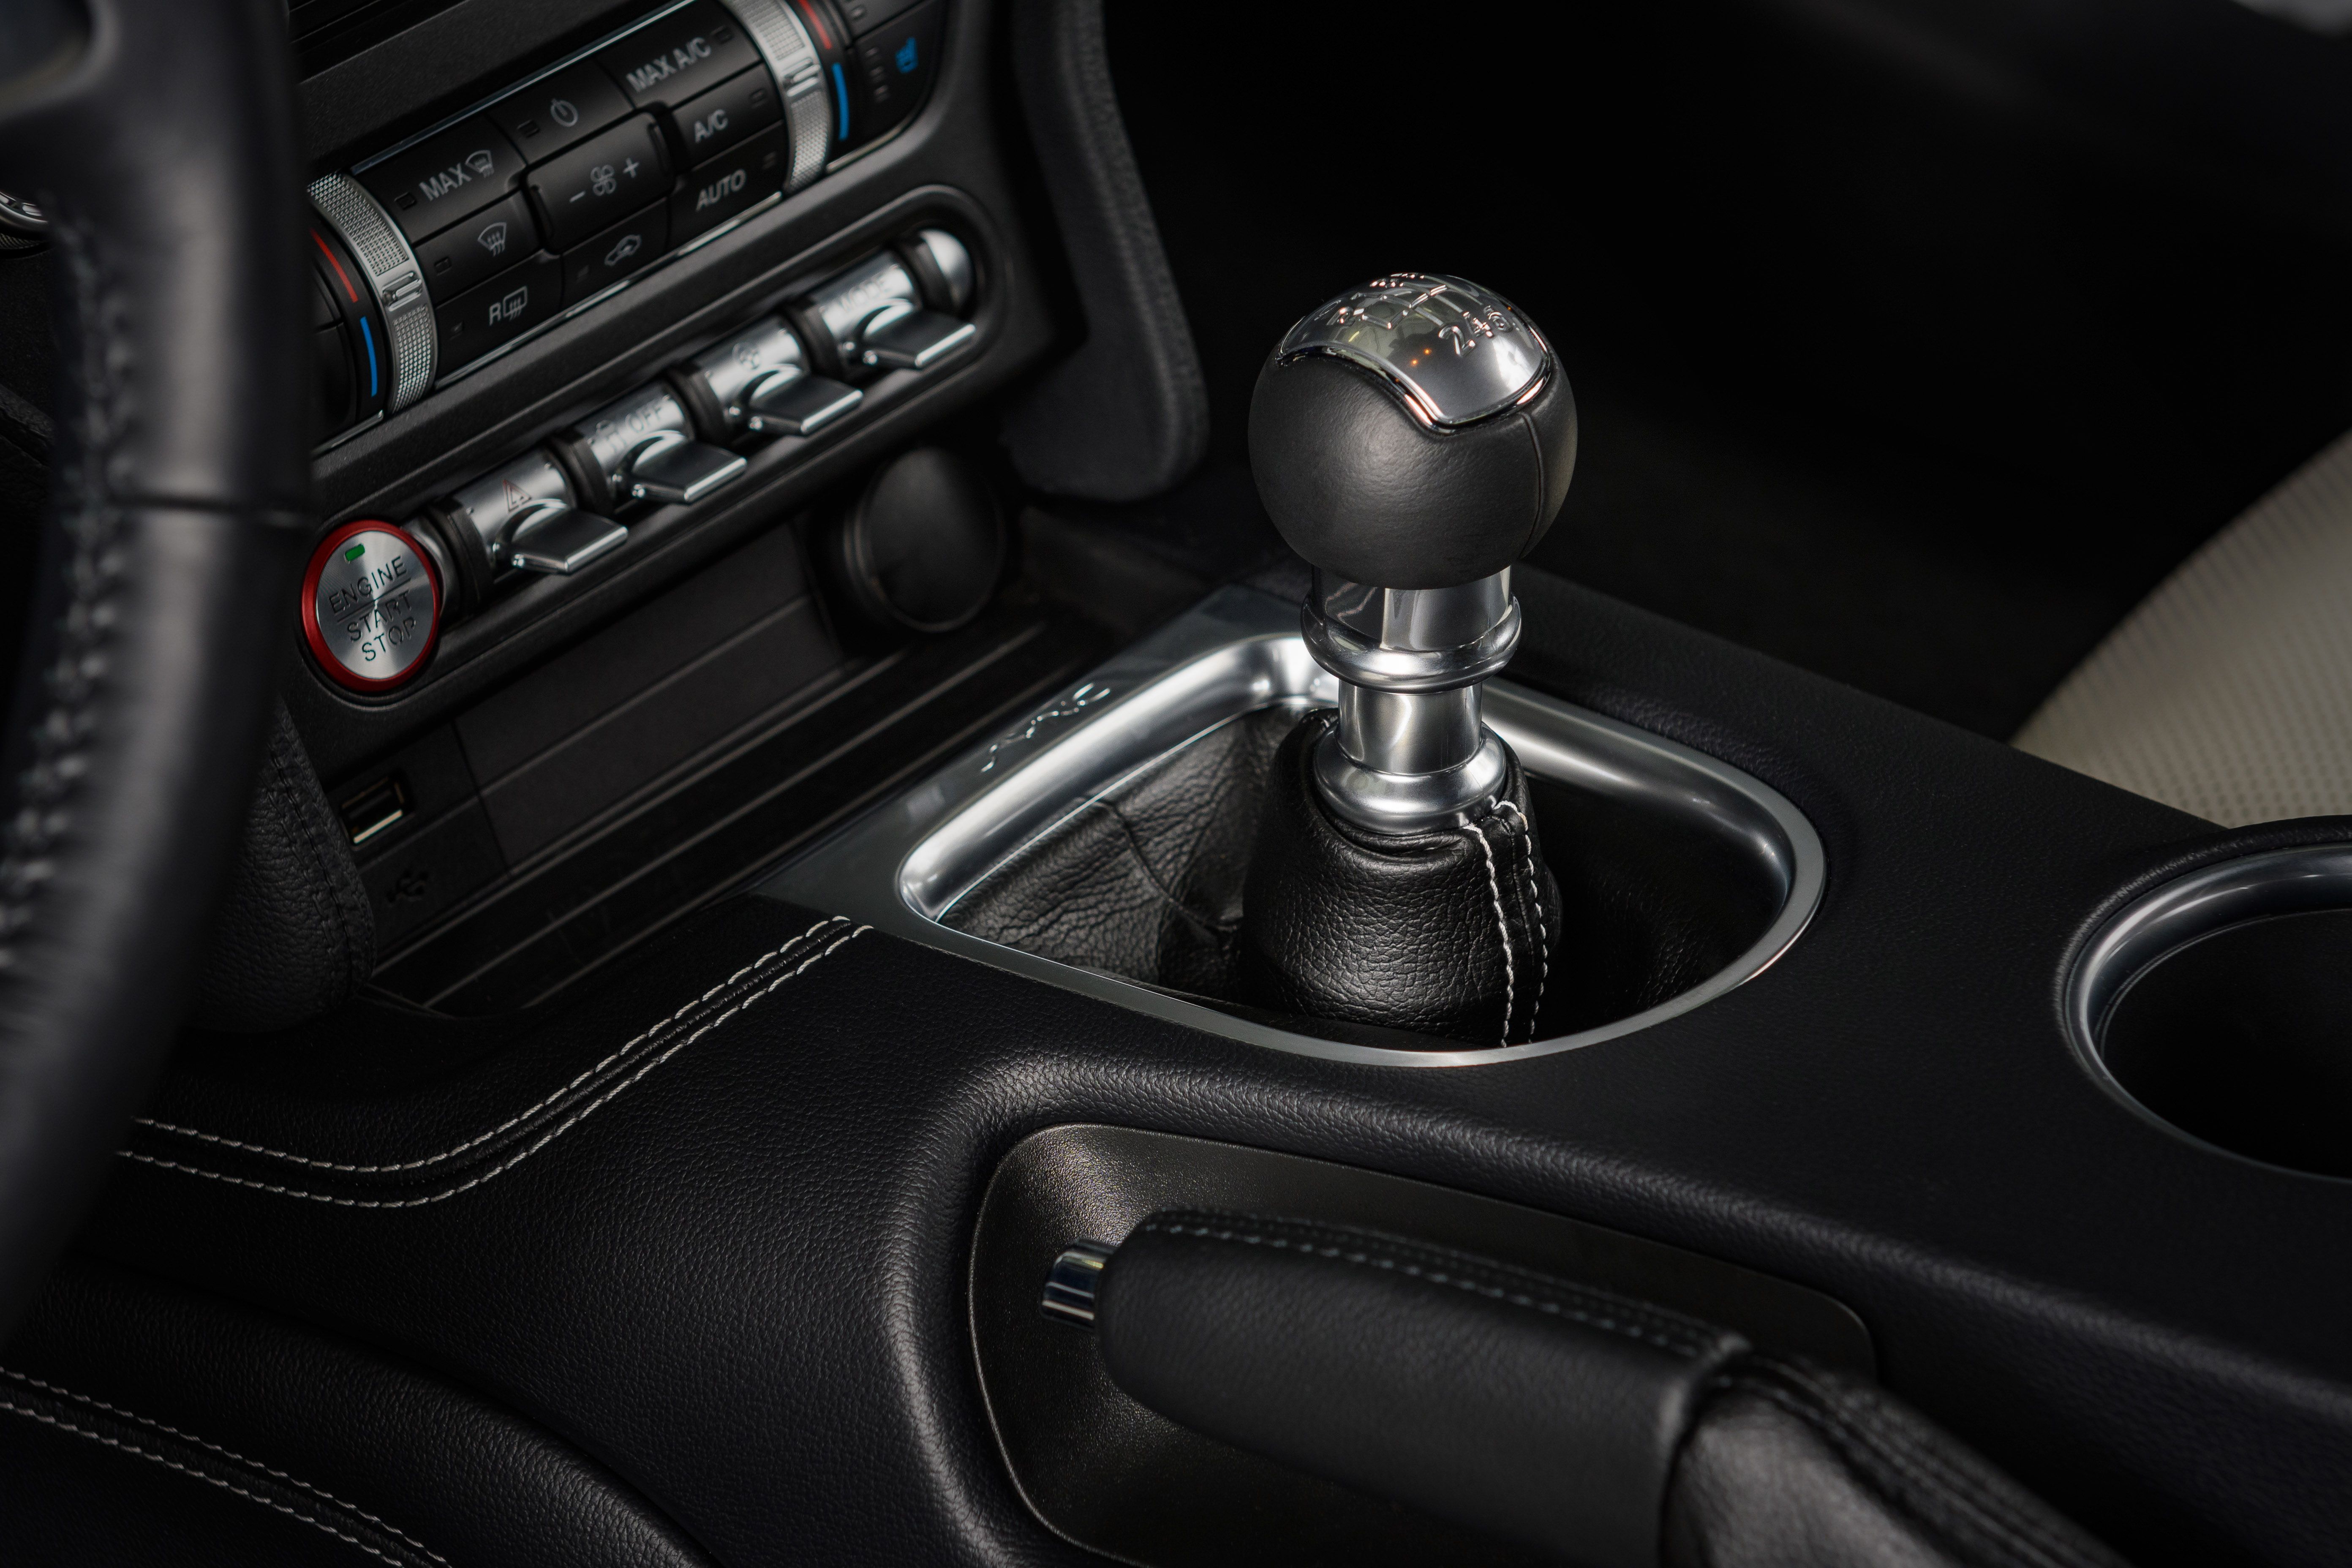 The manual shifter of the 2022 Mustang Coupe.